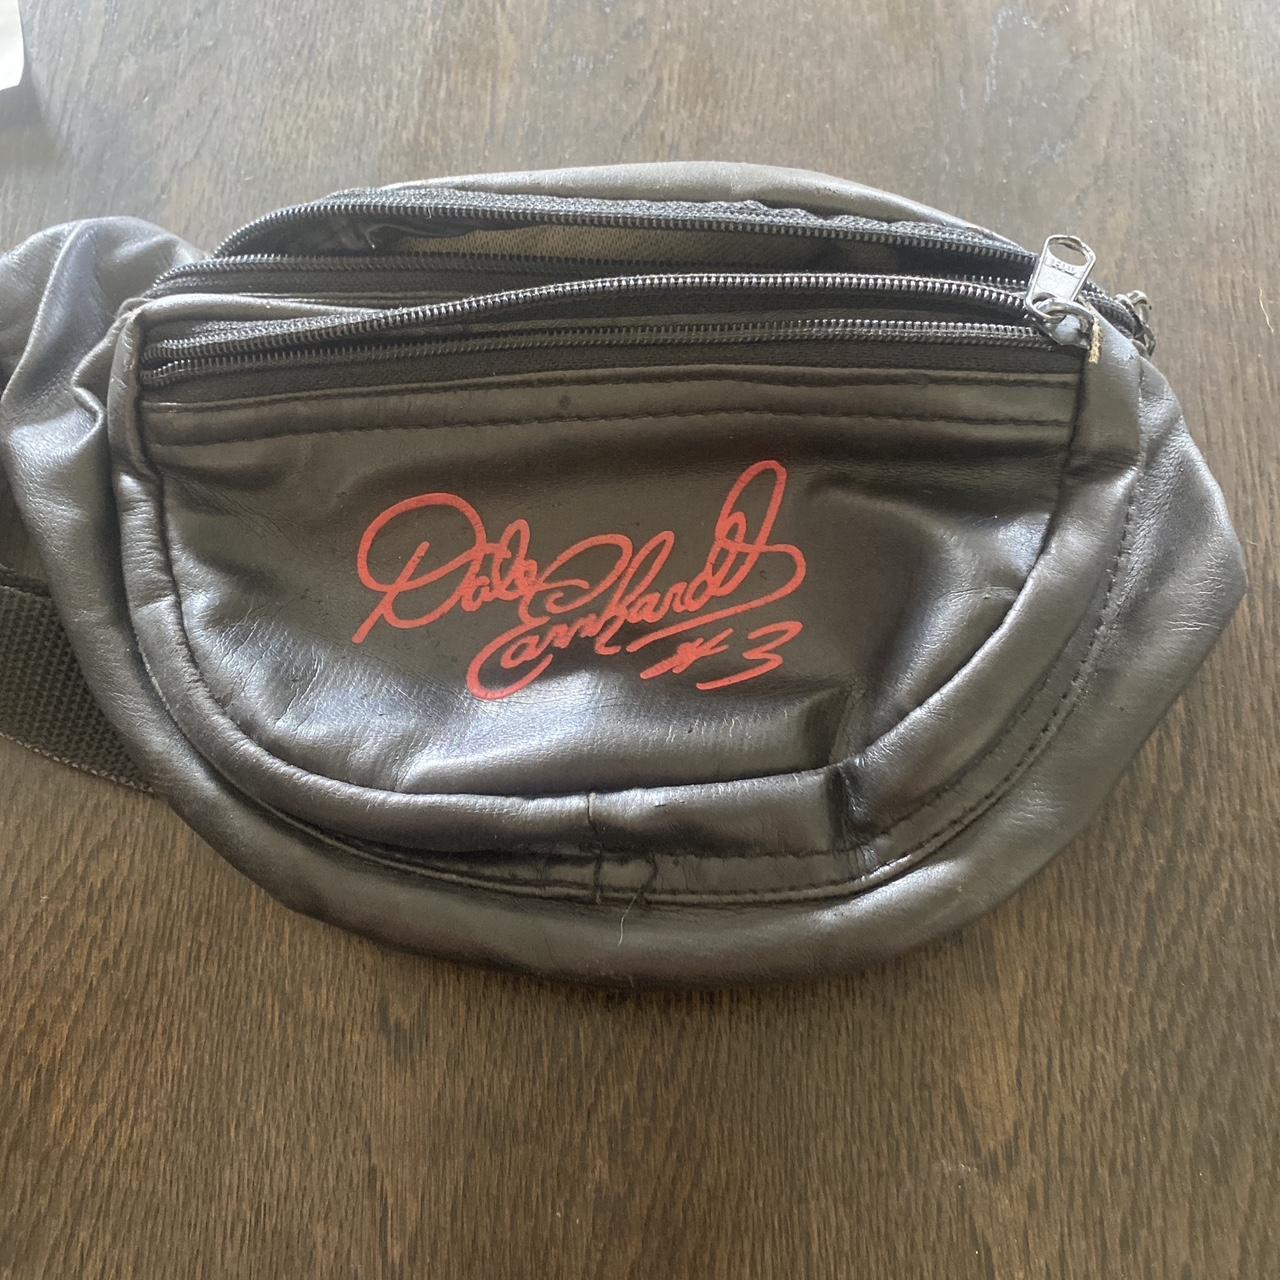 Dale Earnhardt Nascar Fanny pack with, playing cards - Depop